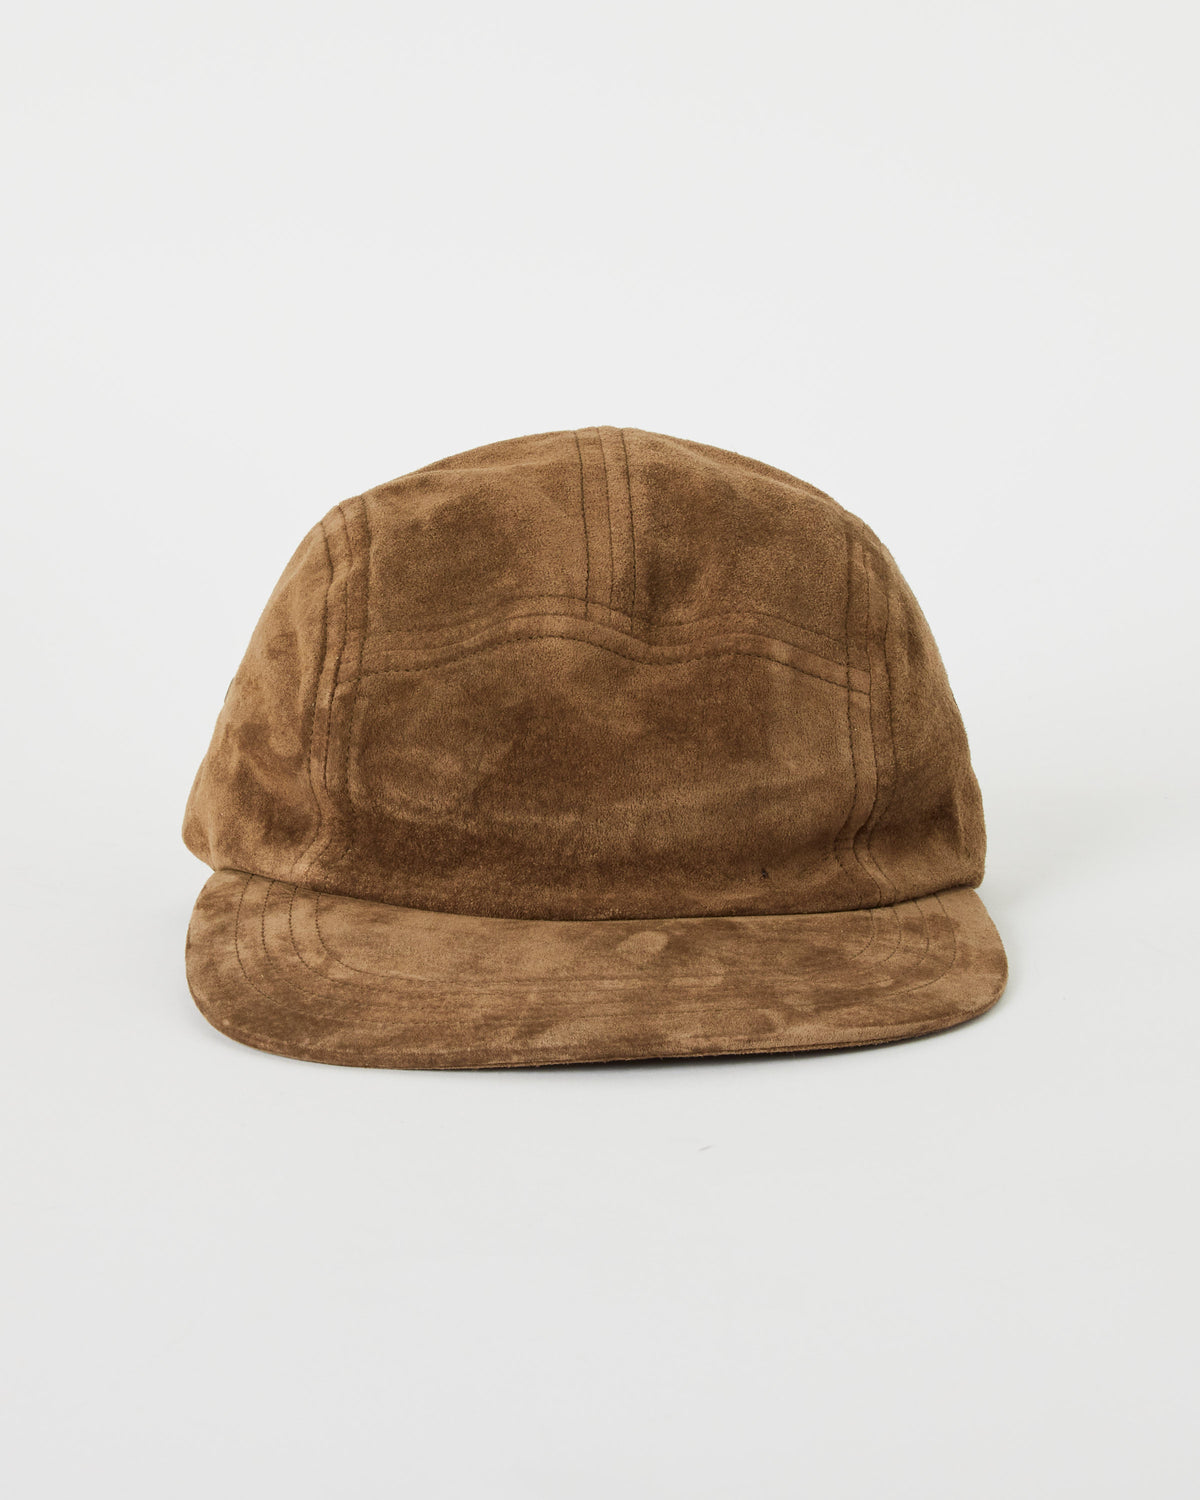 Looking for a Pig Jet Cap in Khaki Olive Hender Scheme to purchase